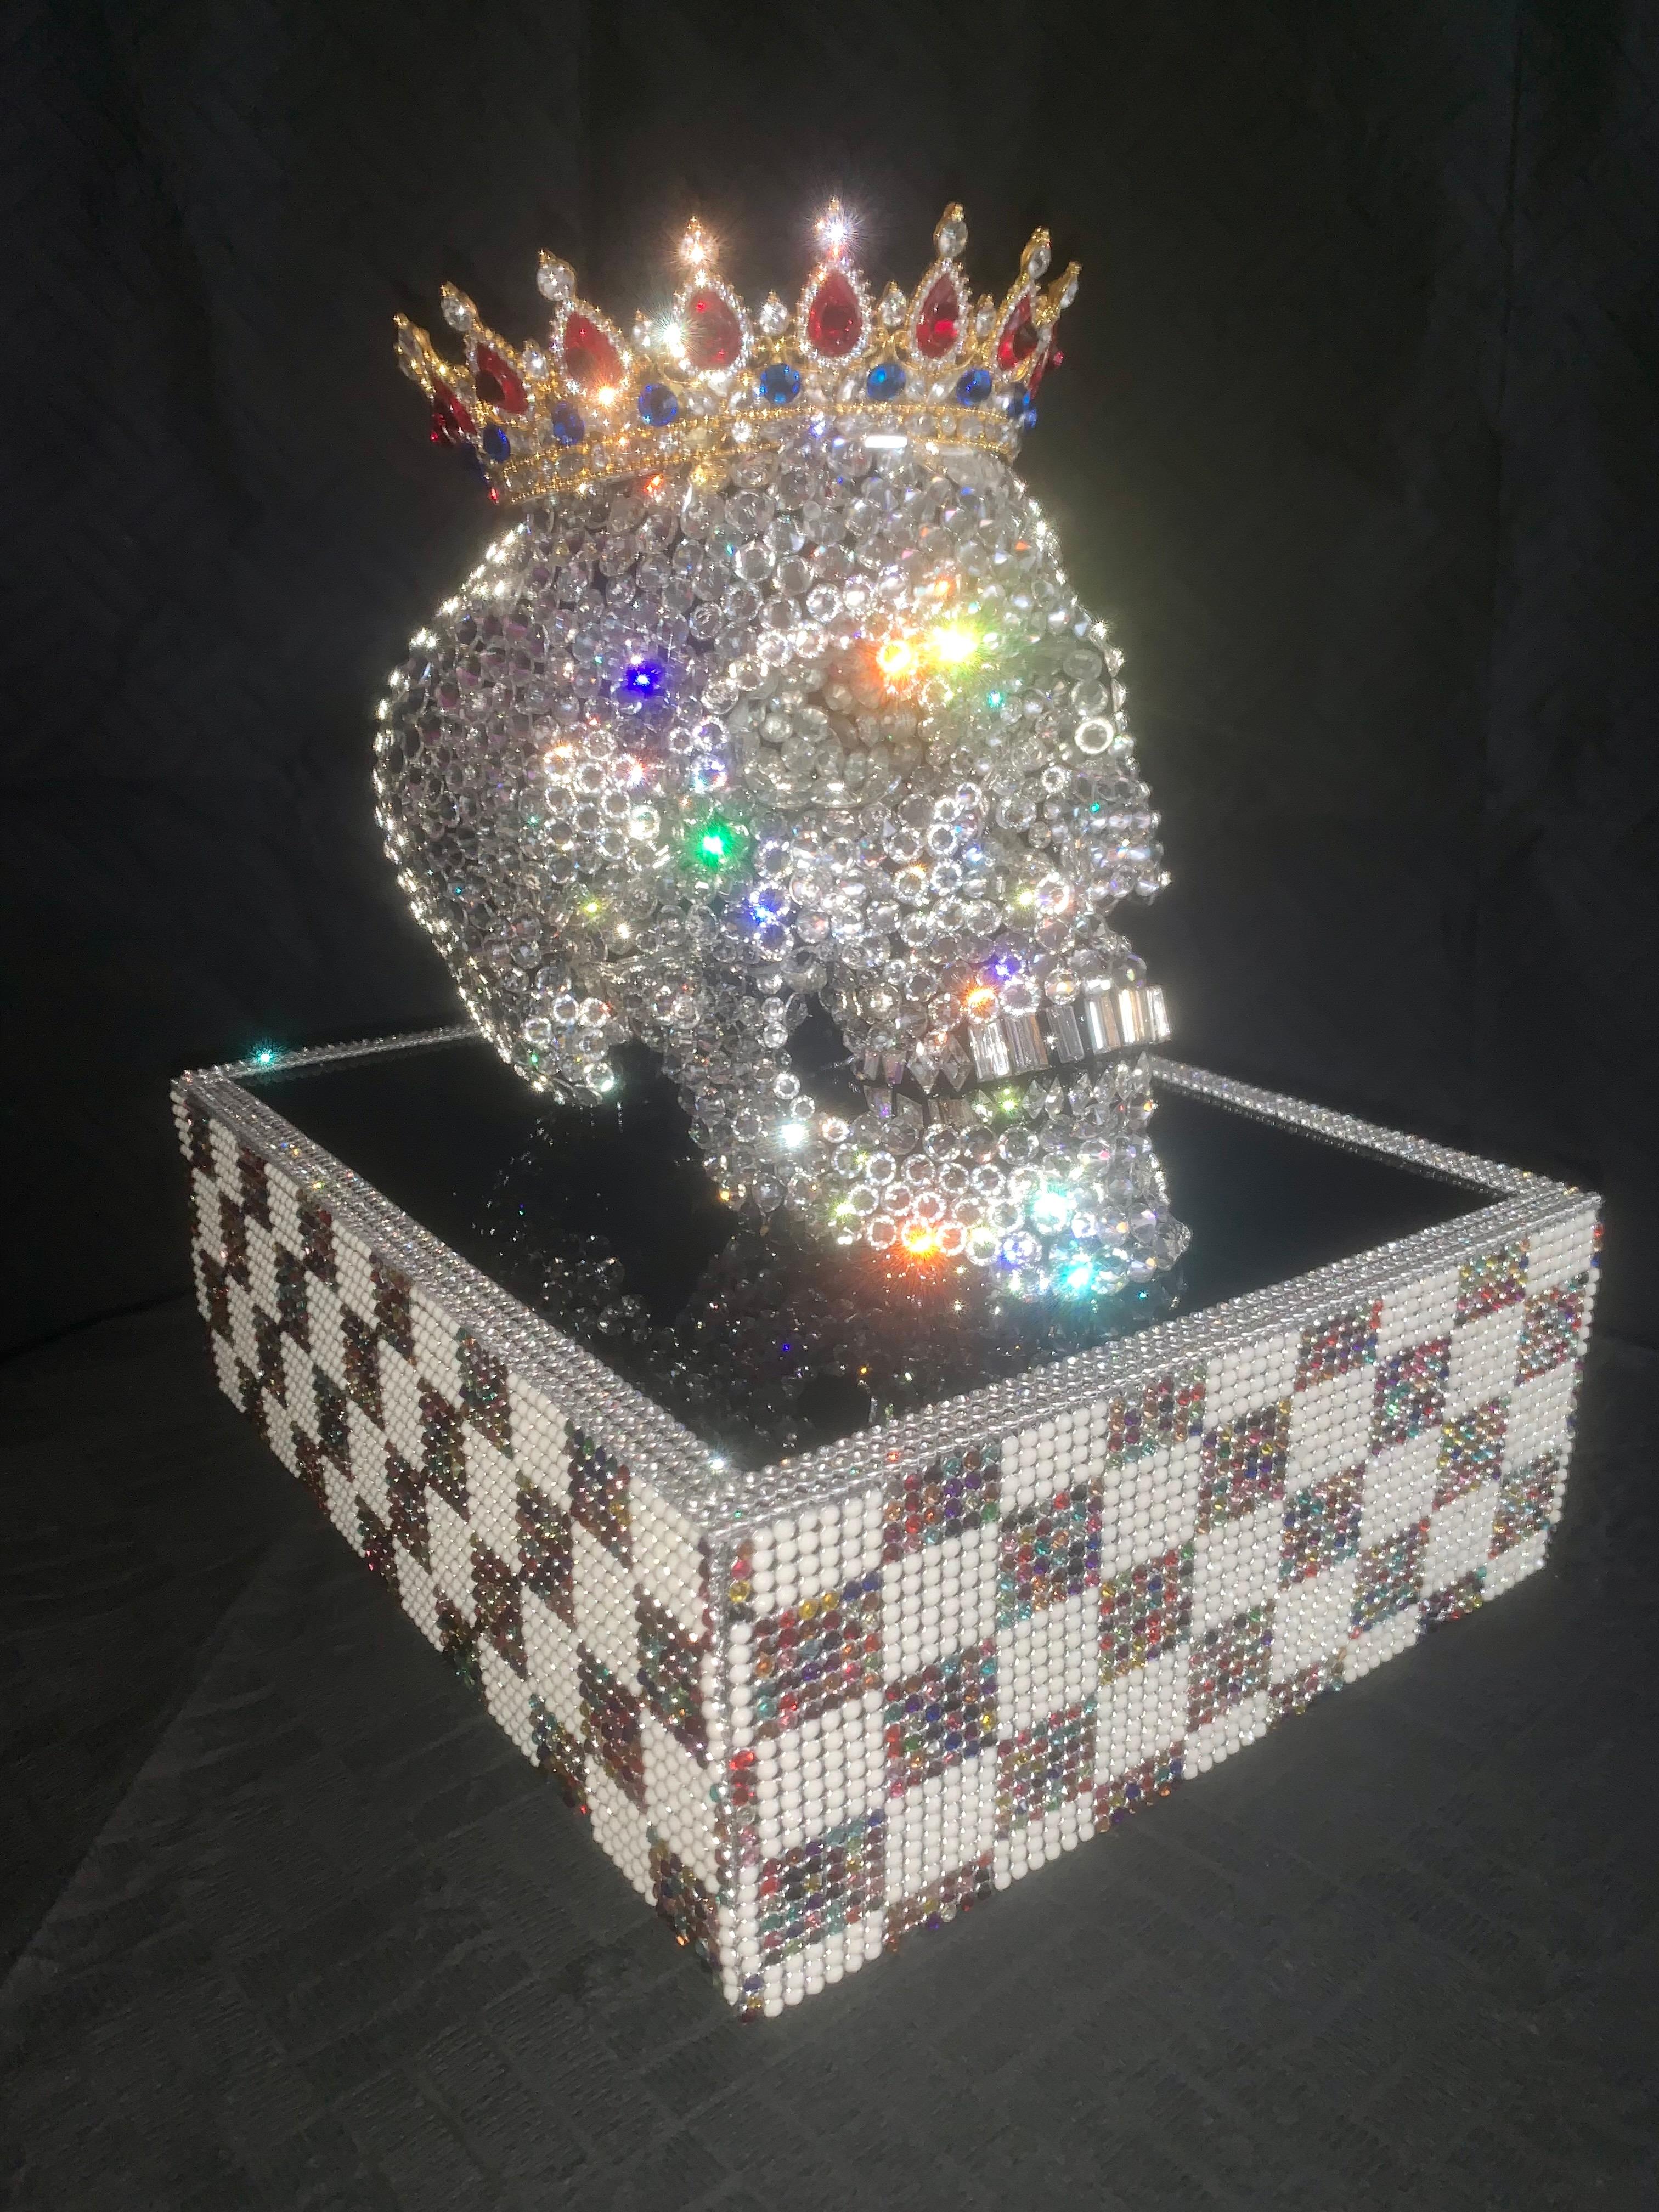 PRINCE PHILIP-DUKE OF EDINBURGH (1 of a kind Swarovski Skull w/ Base and Crown). - Contemporary Sculpture by Mauro Oliveira